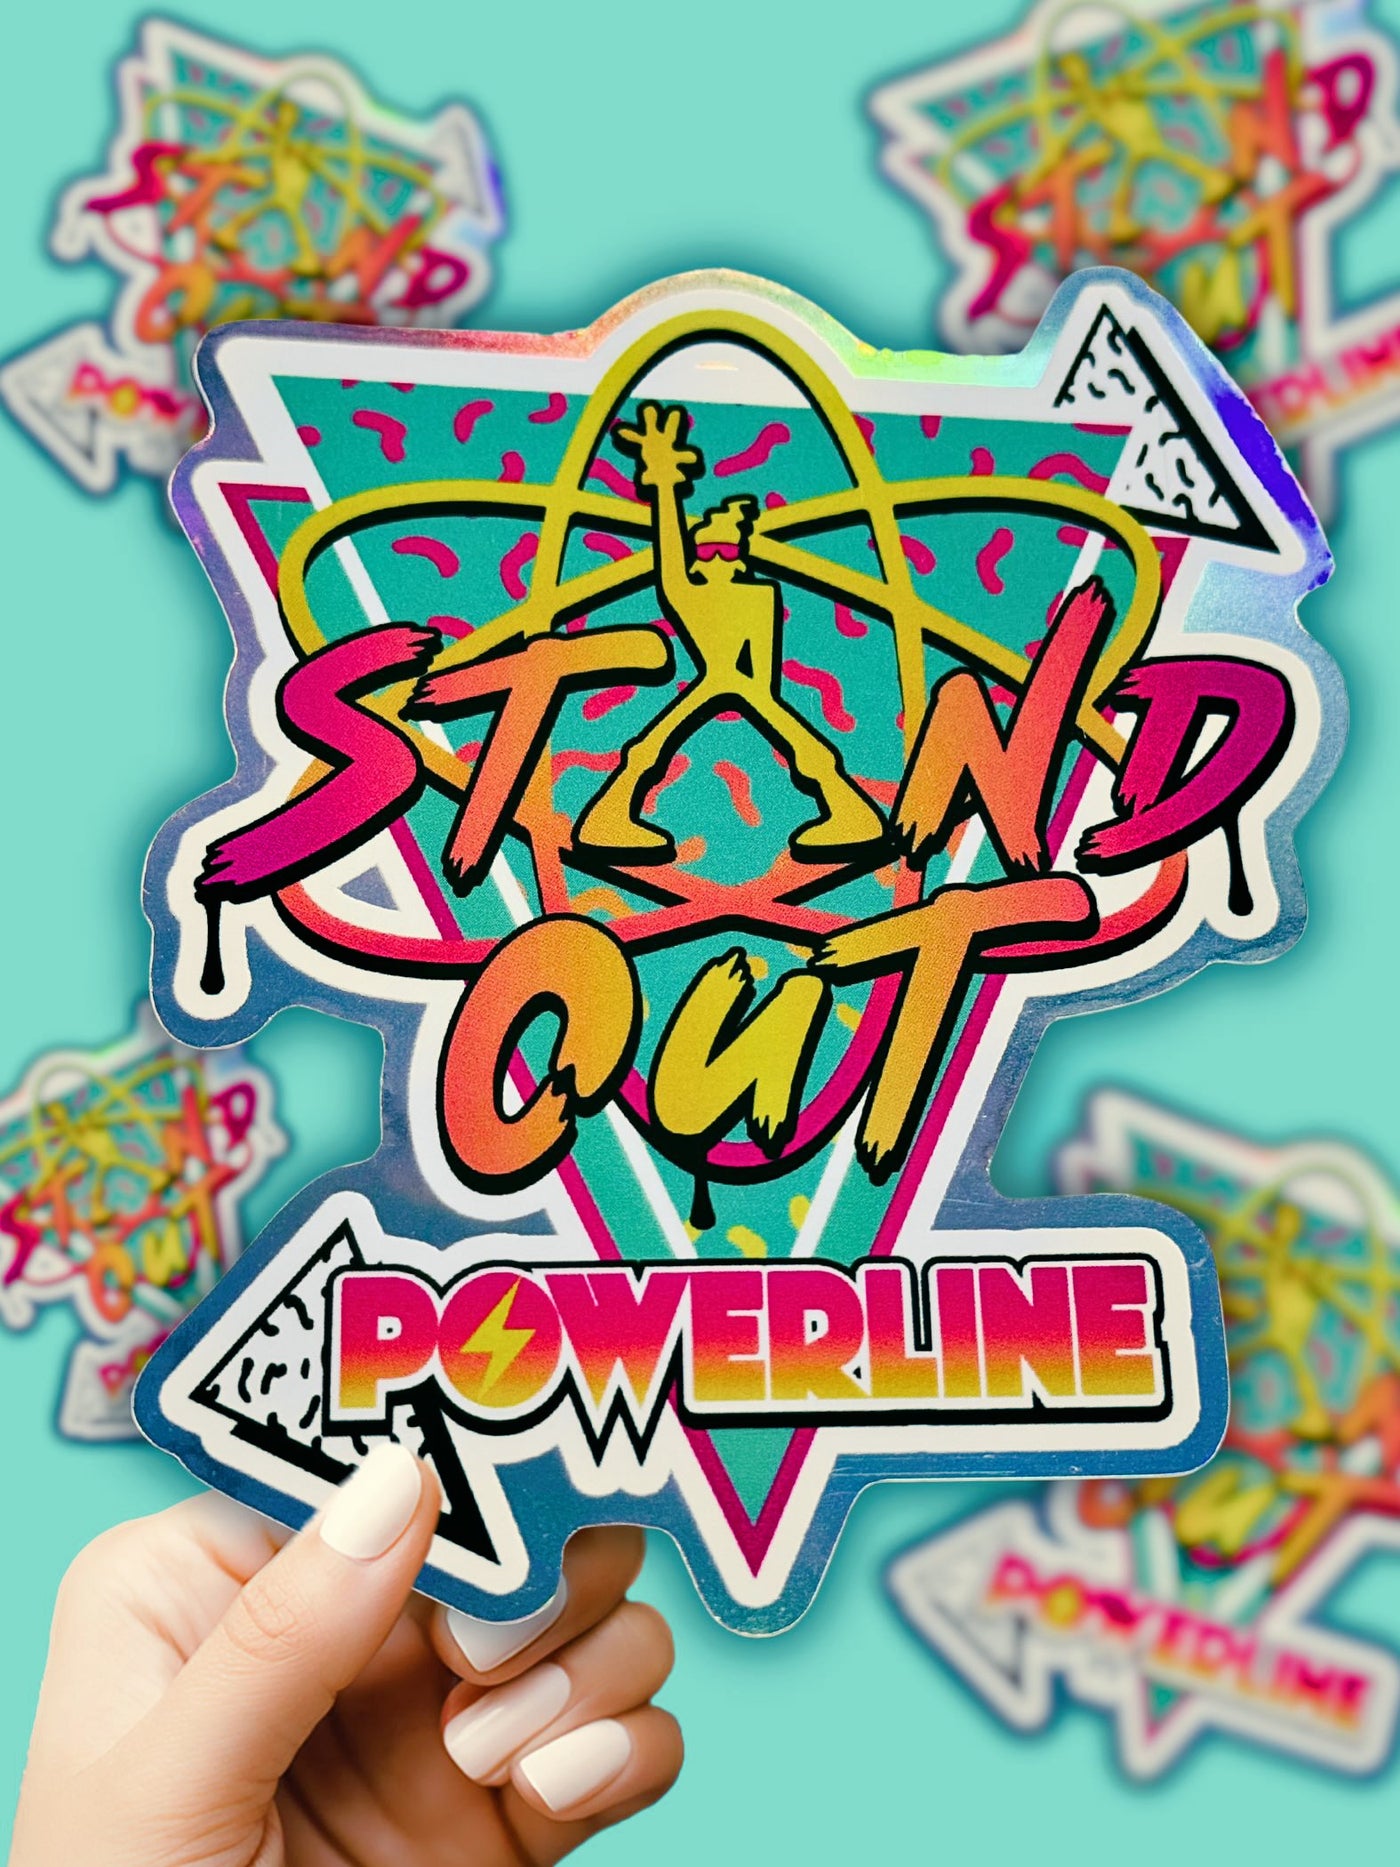 Powerline Stand Out Sticker Art (Decal/Waterproof)